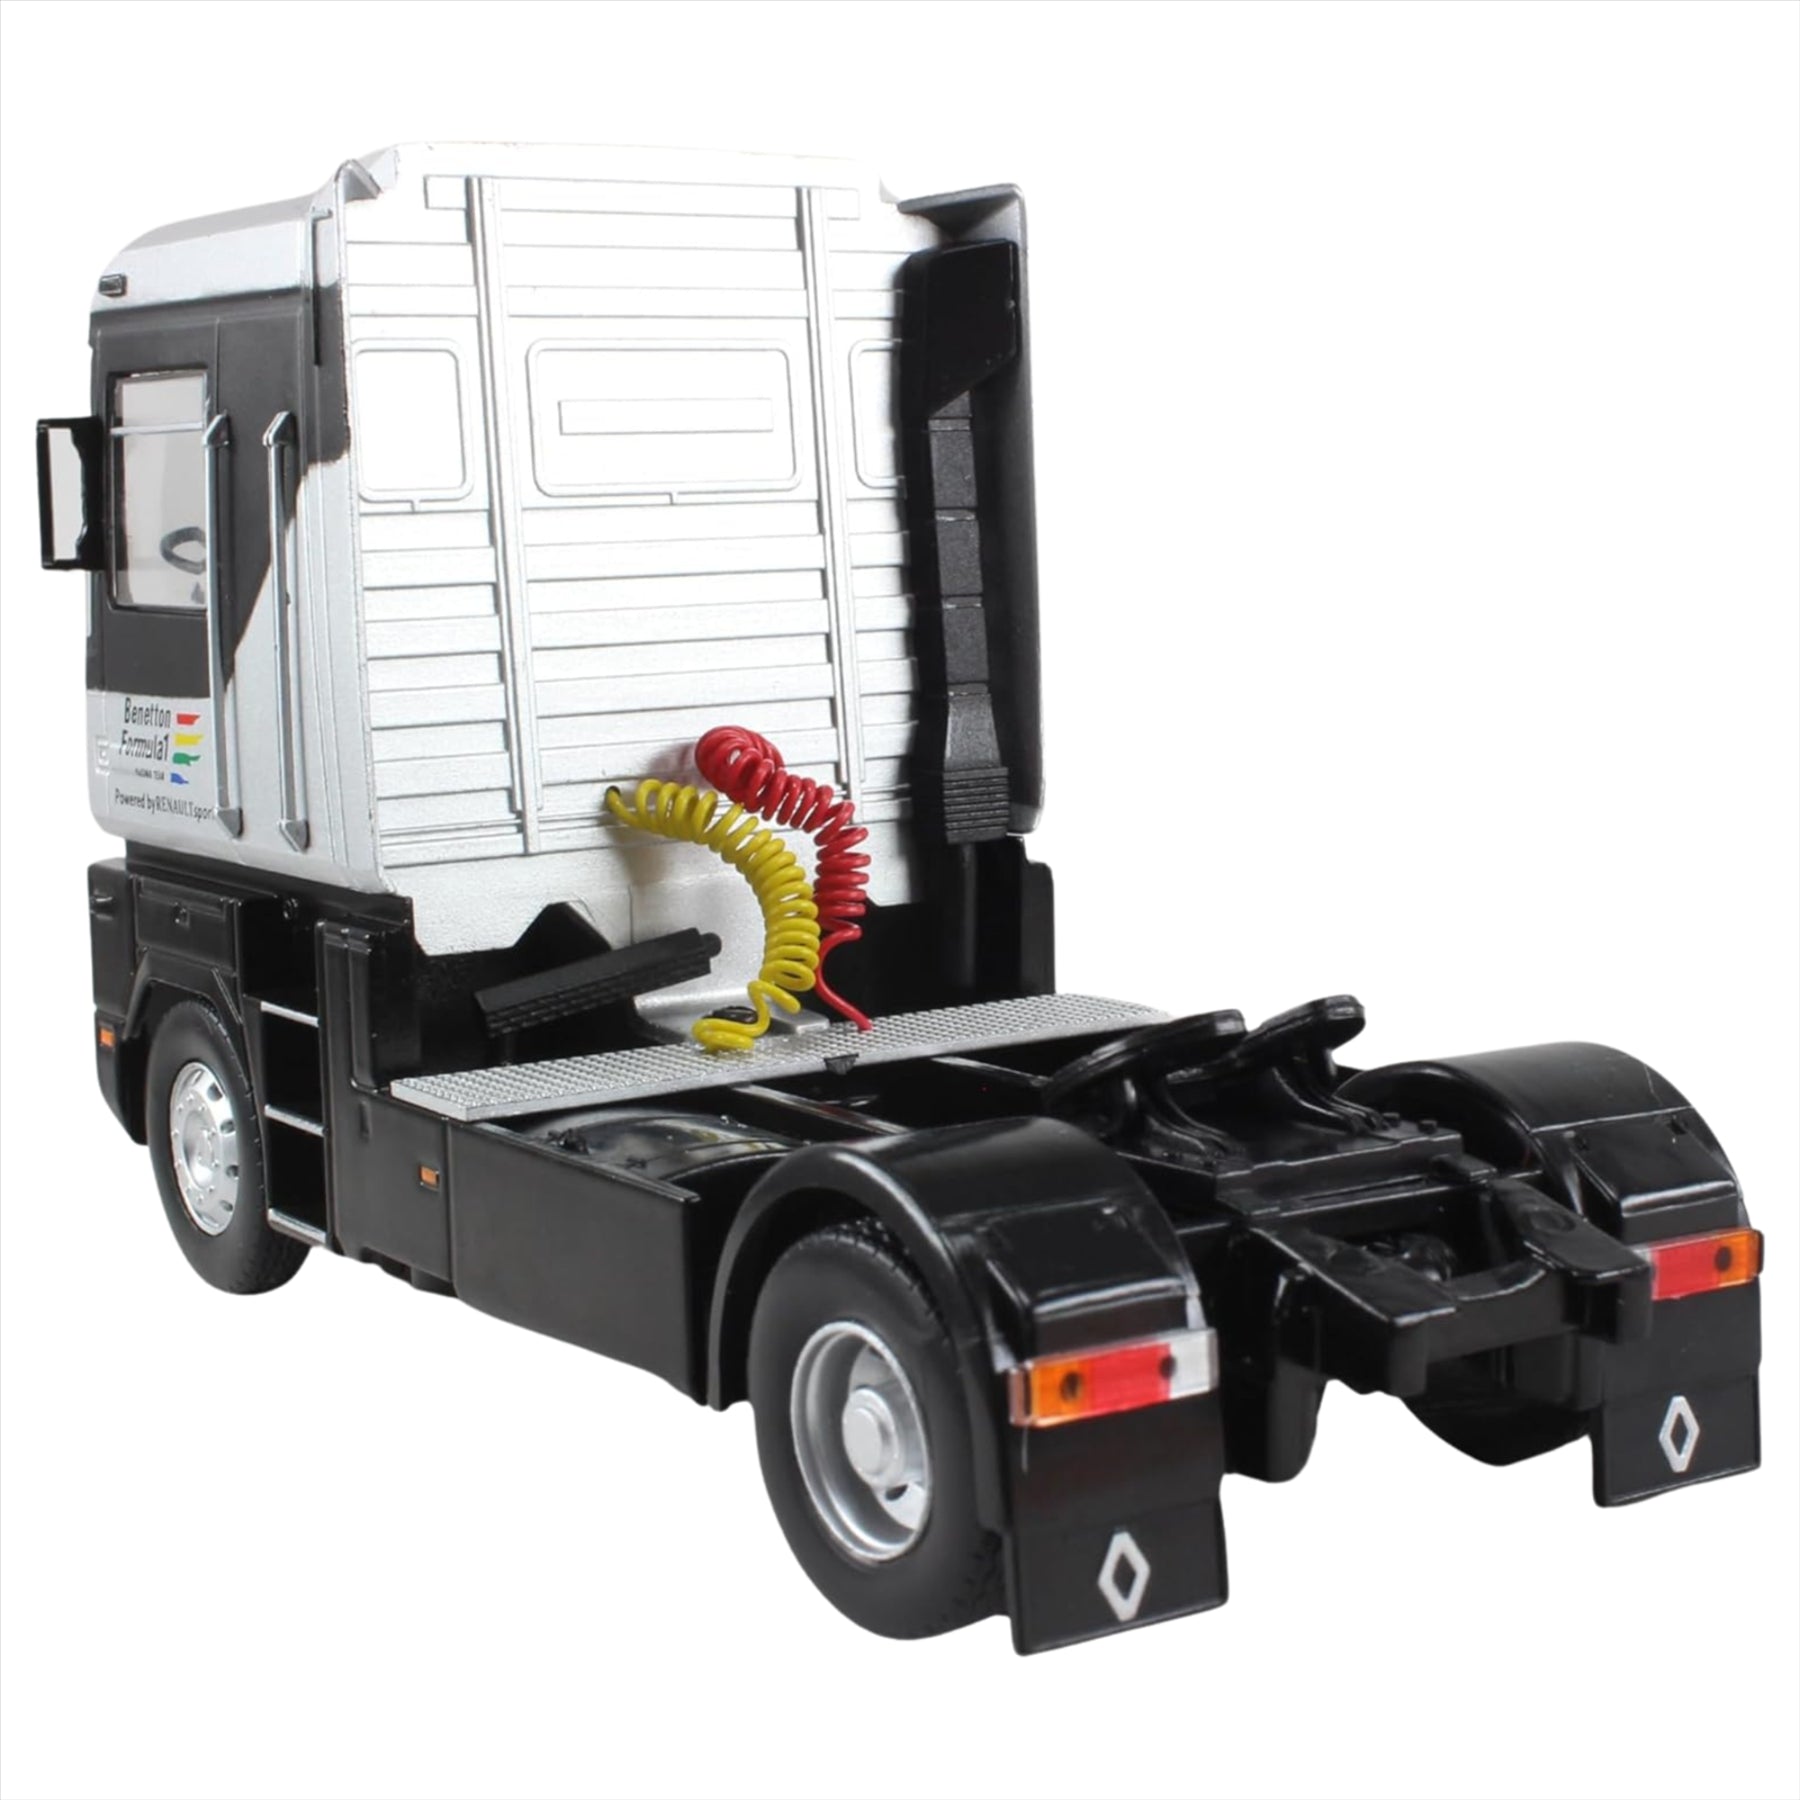 F1 Formula 1 - Centauria 1:43 Scale Large Diecast Articulated HGV Lorry & Trailer - Renault Magnum Official Team Transport - 37cm in Length - Toptoys2u